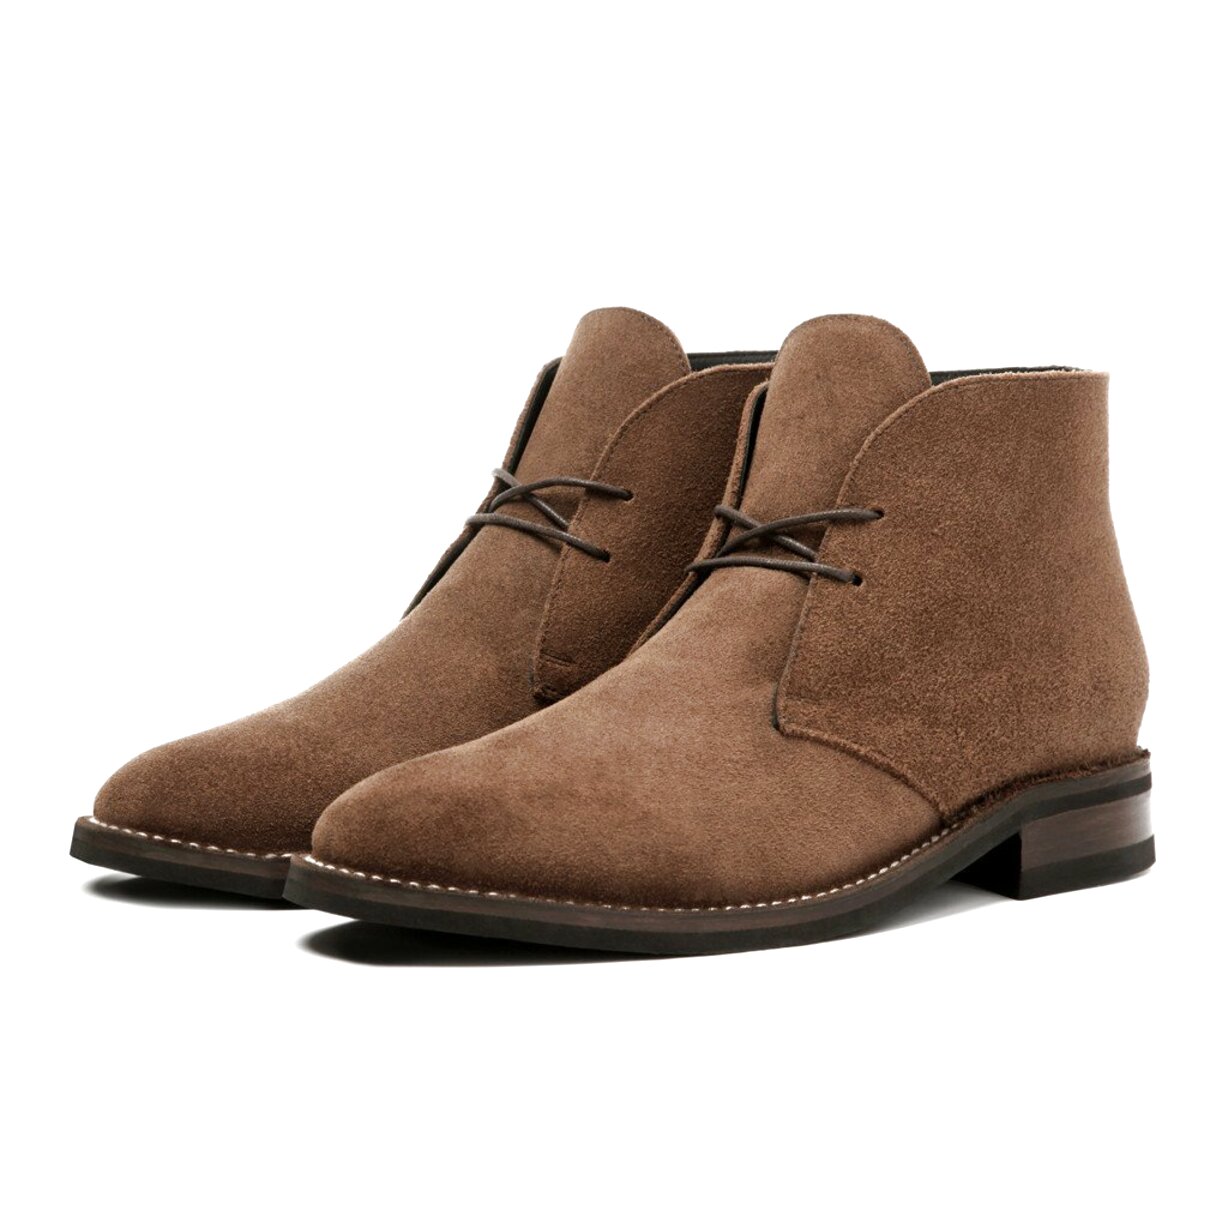 Suede Chukka Boots for sale in UK | 65 used Suede Chukka Boots